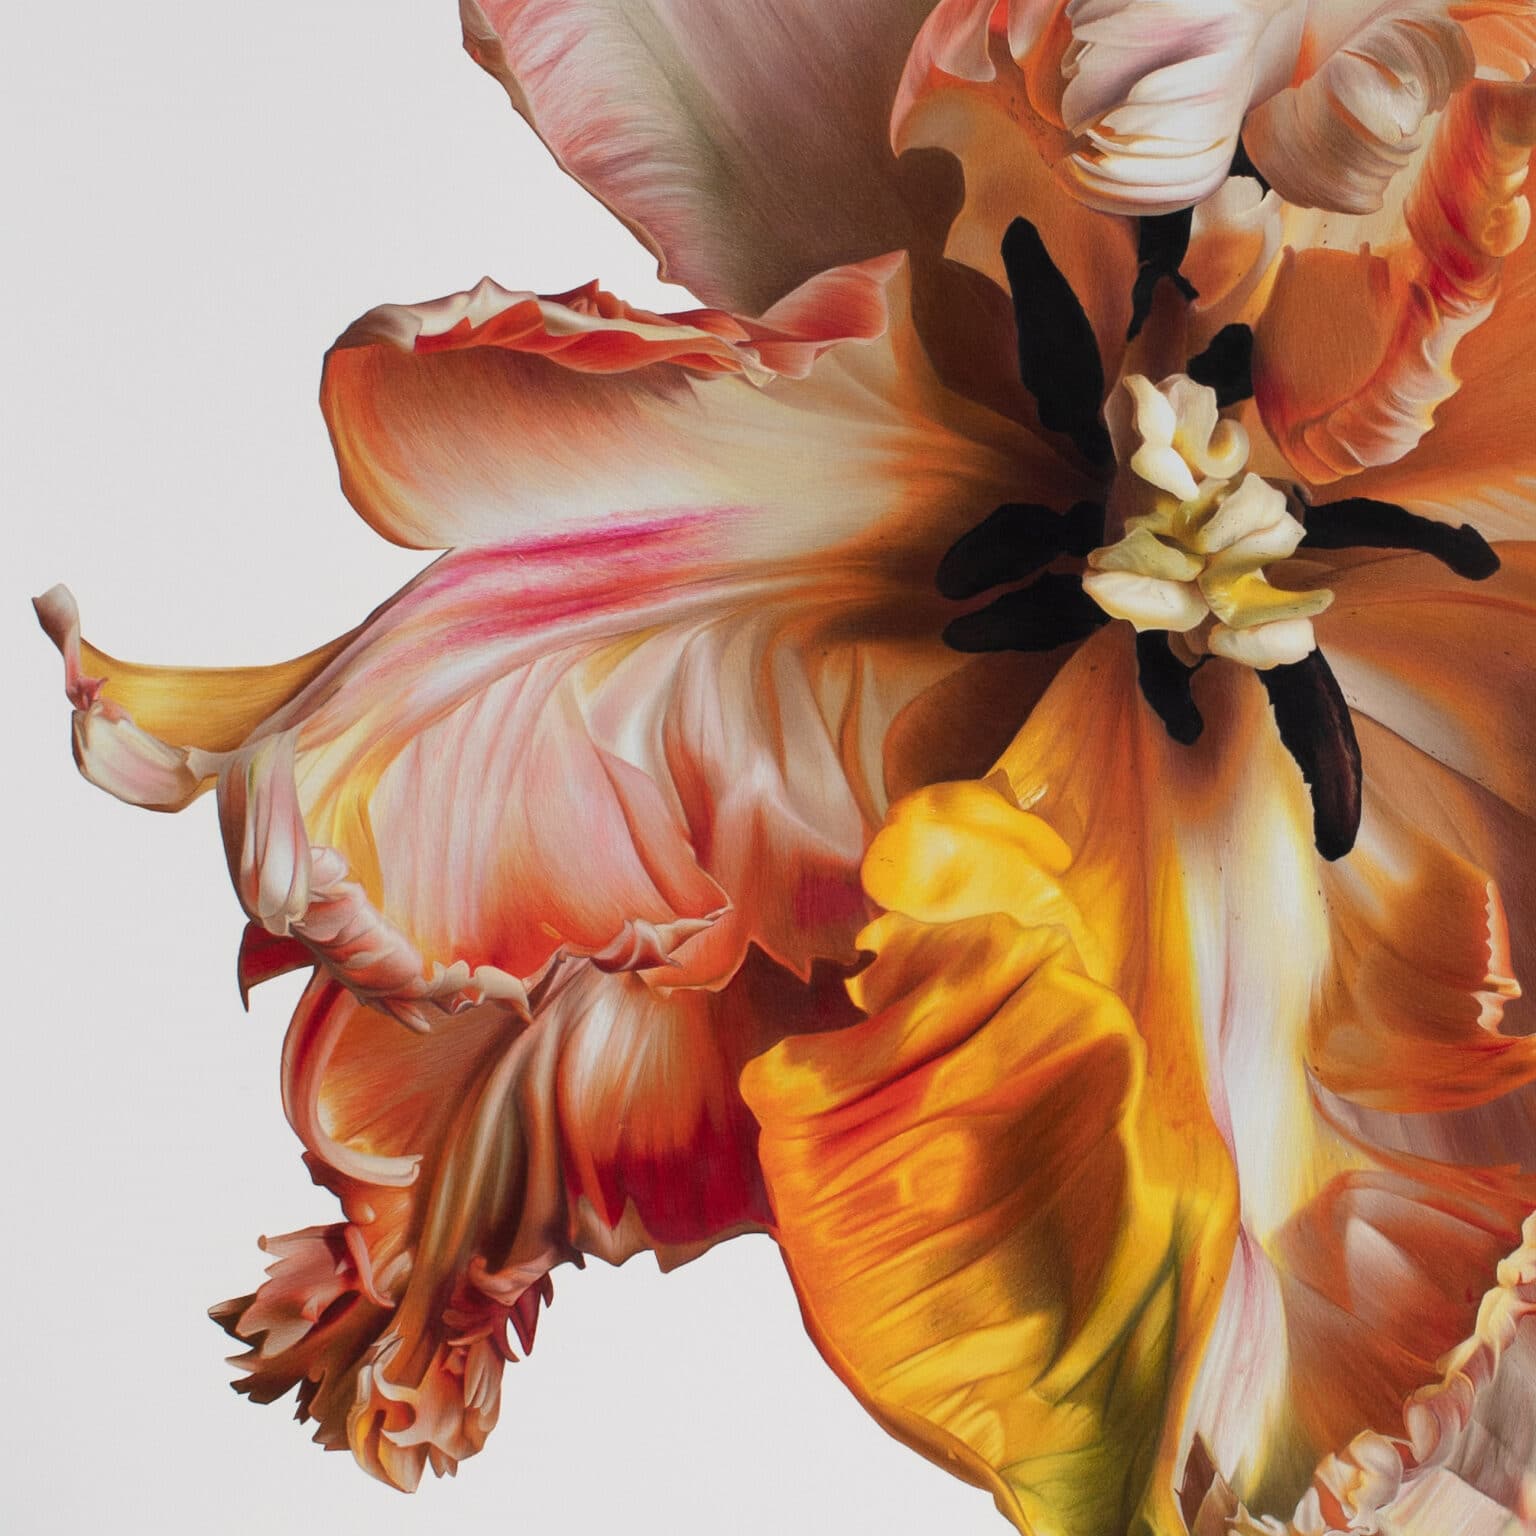 Artist Captures Ethereal Flowers in Hyperrealistic Colored Pencil Drawings